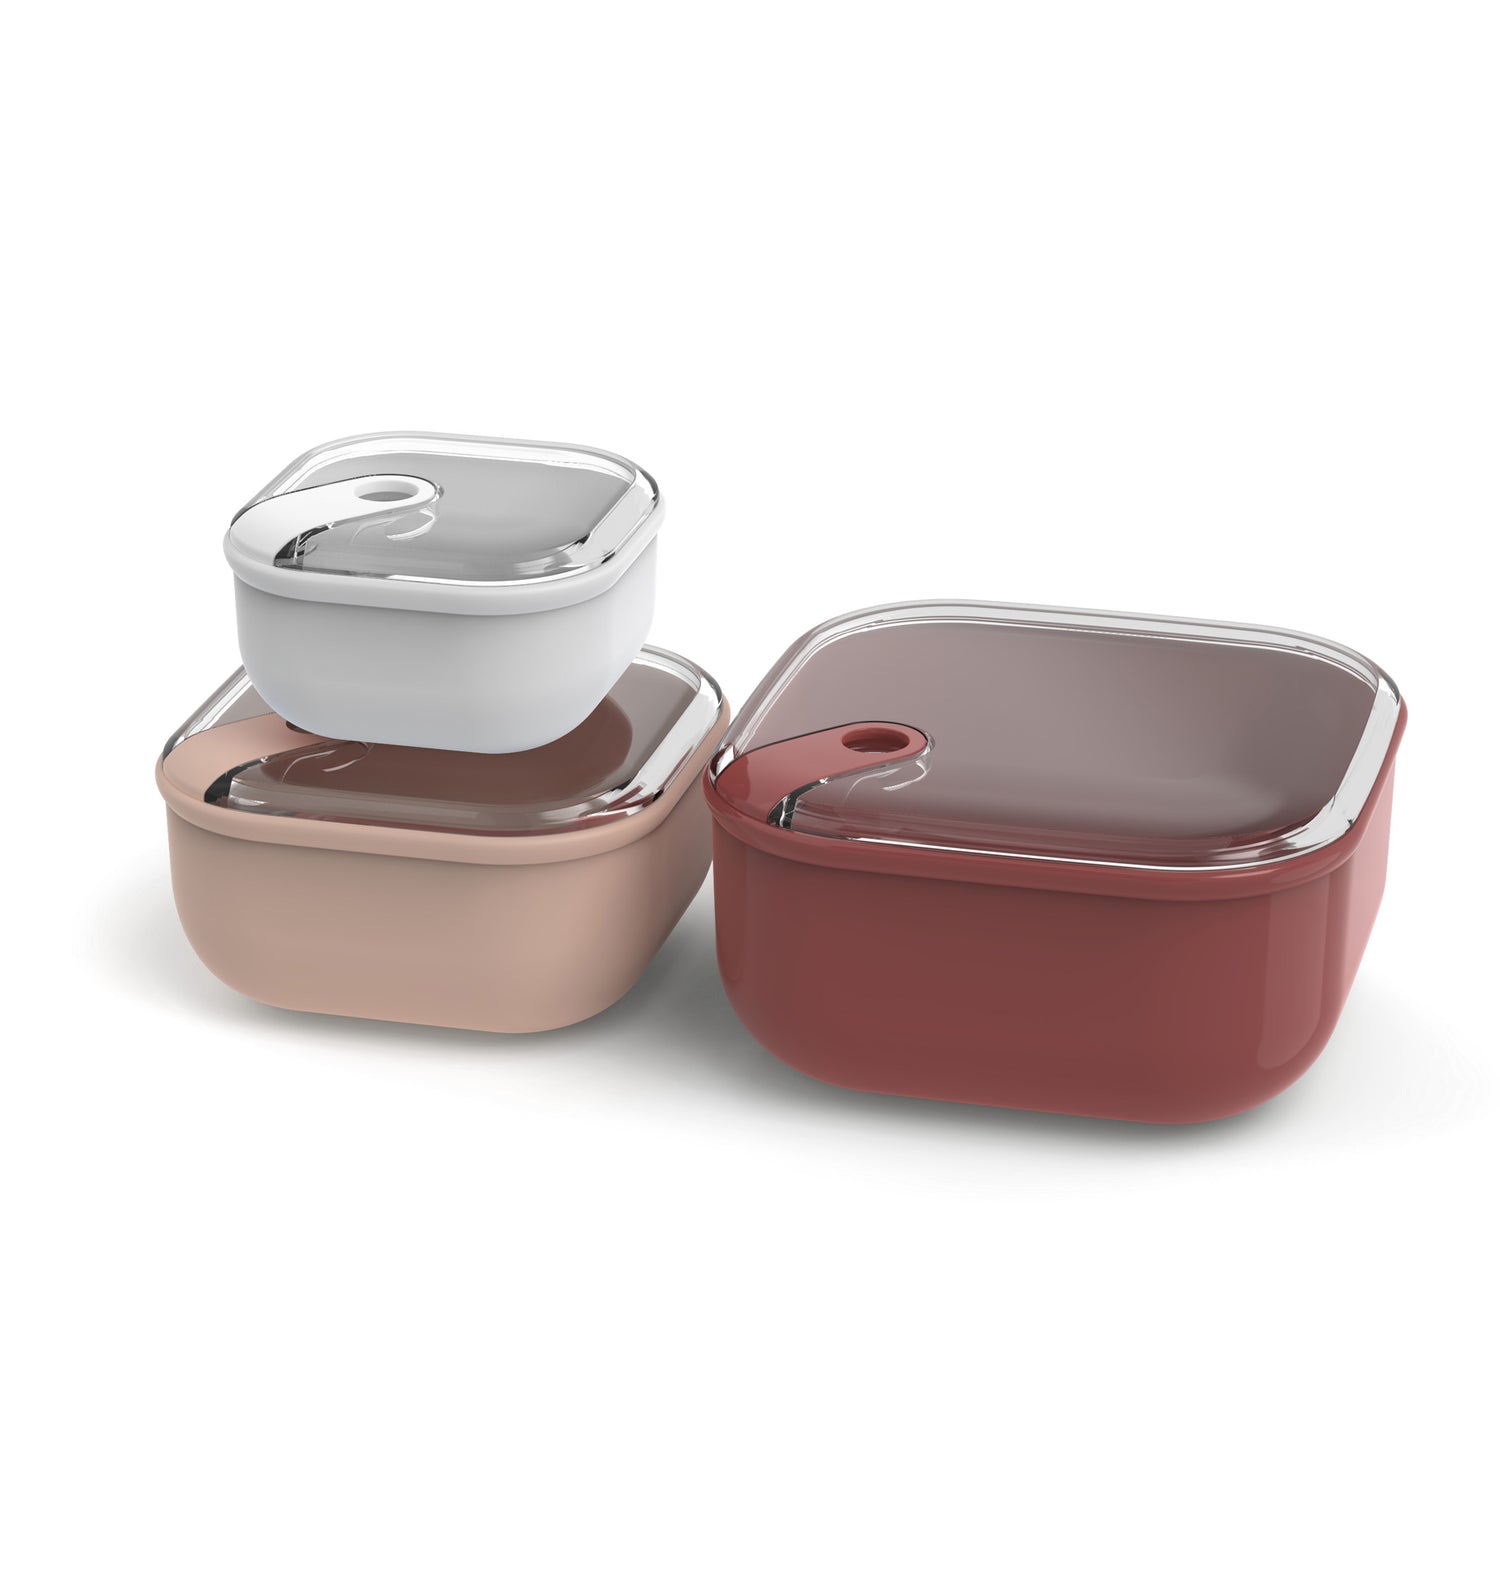 Set of 3 freshness containers ELA